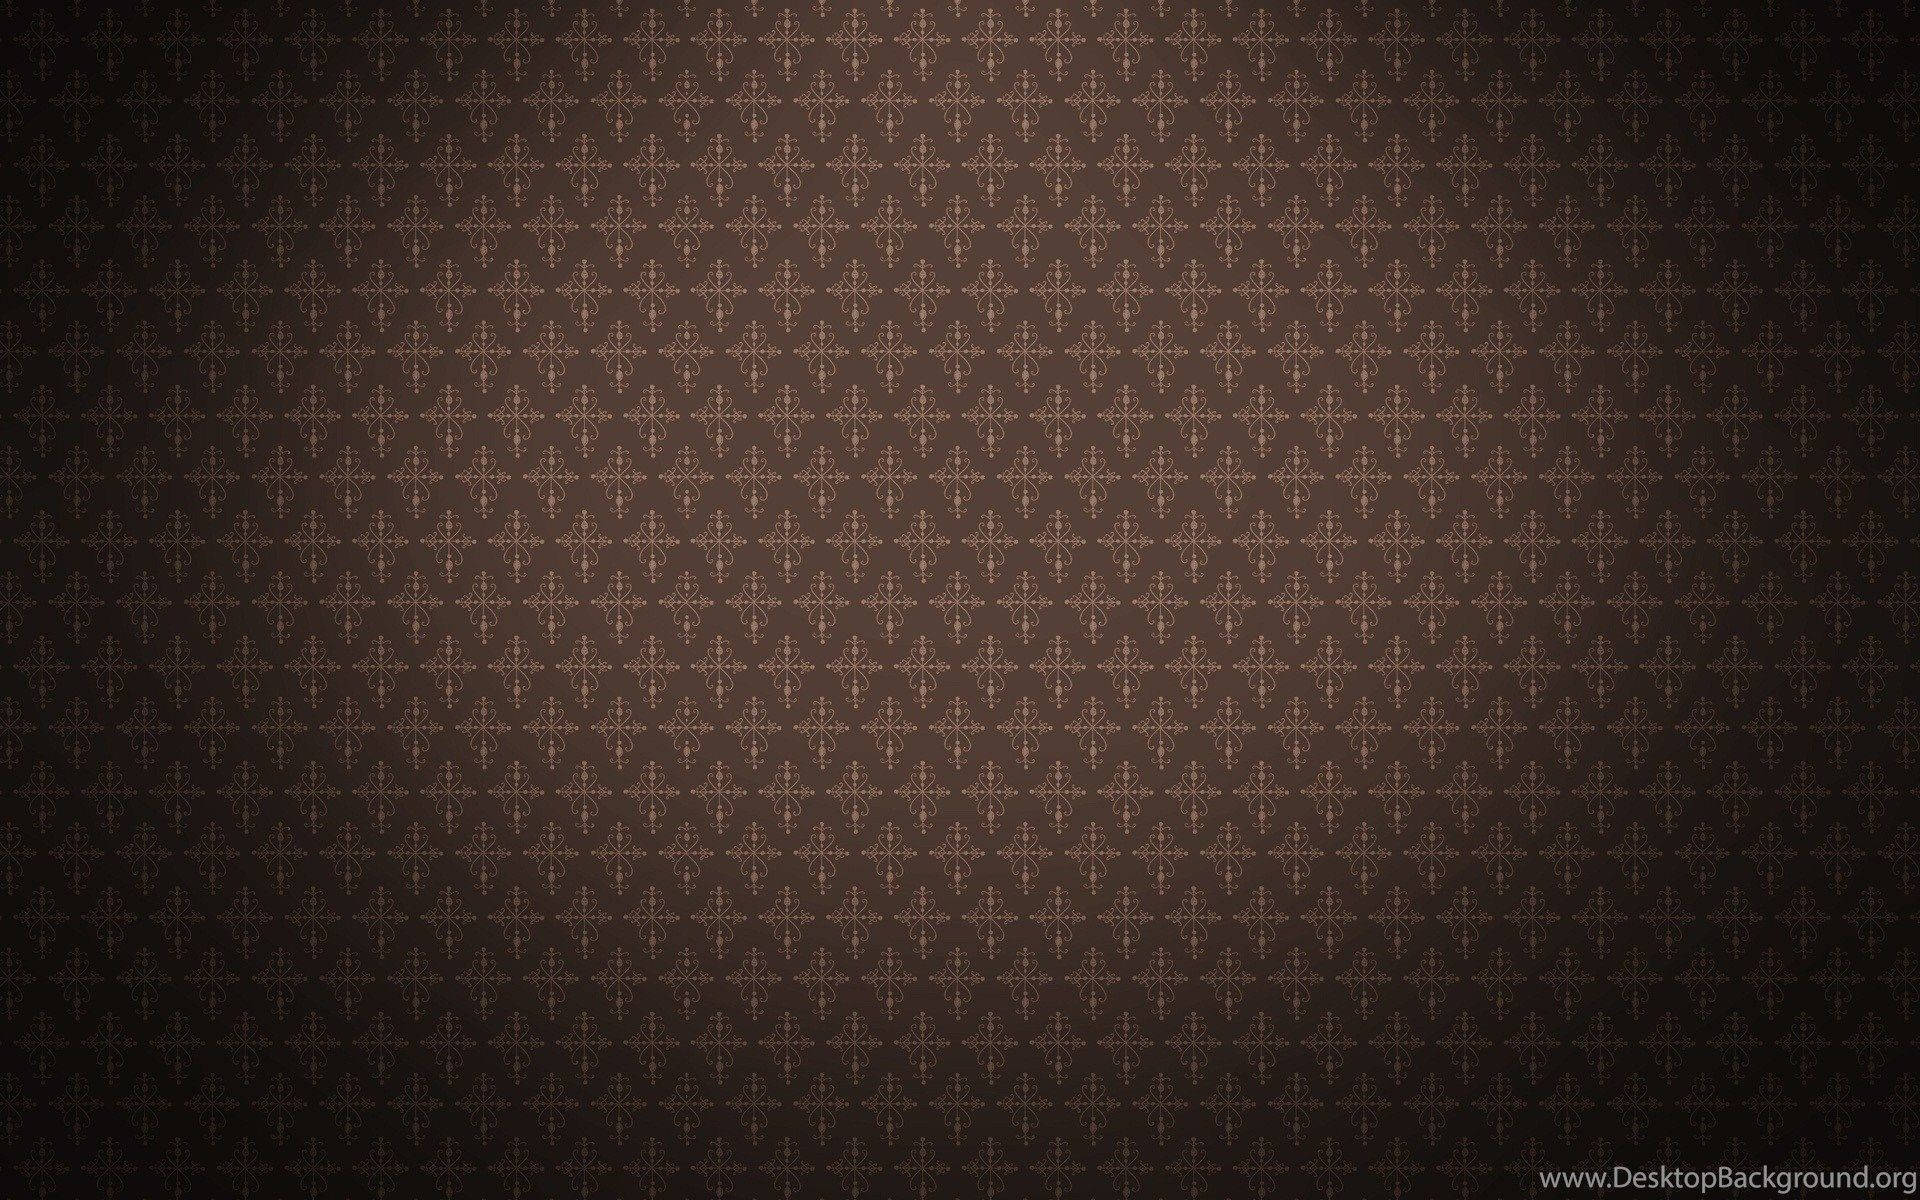 Louis Vuitton Leather Wallpapers - Top Free Louis Vuitton Leather